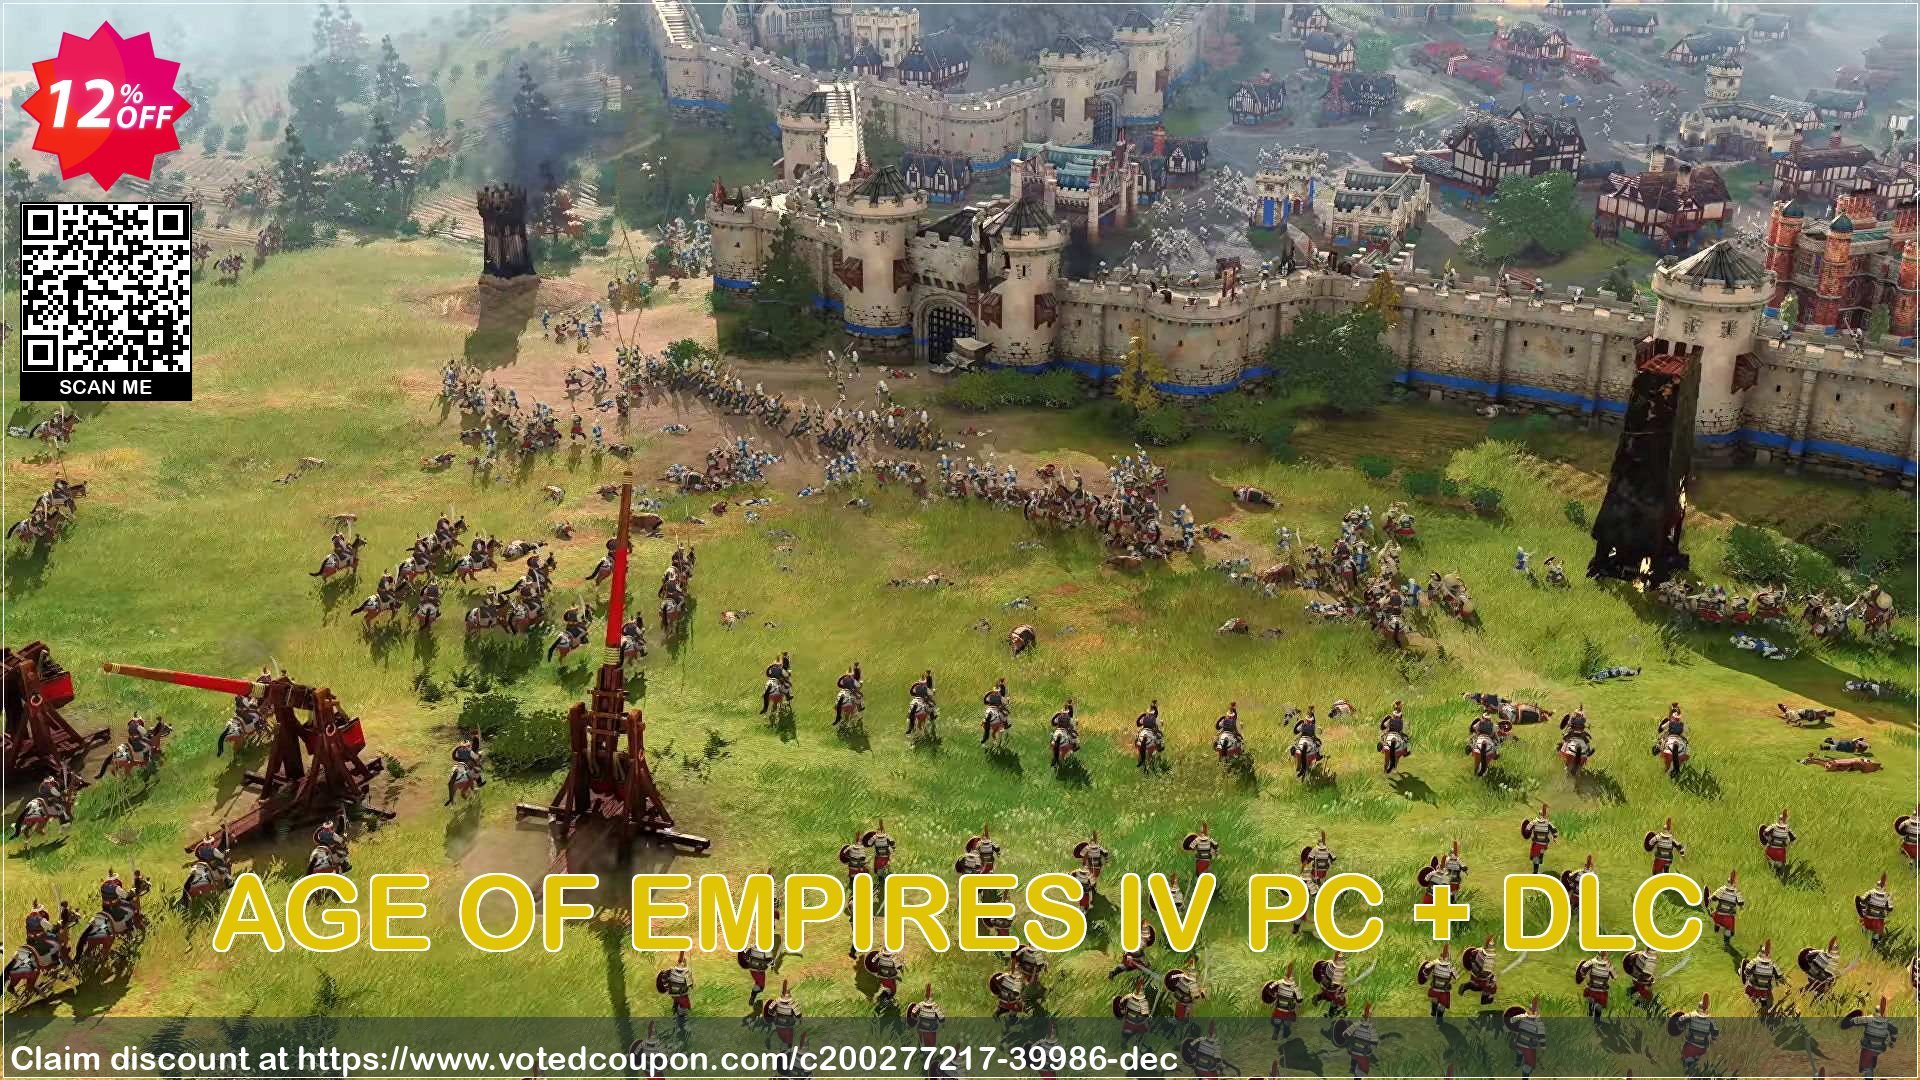 AGE OF EMPIRES IV PC + DLC Coupon Code May 2024, 12% OFF - VotedCoupon